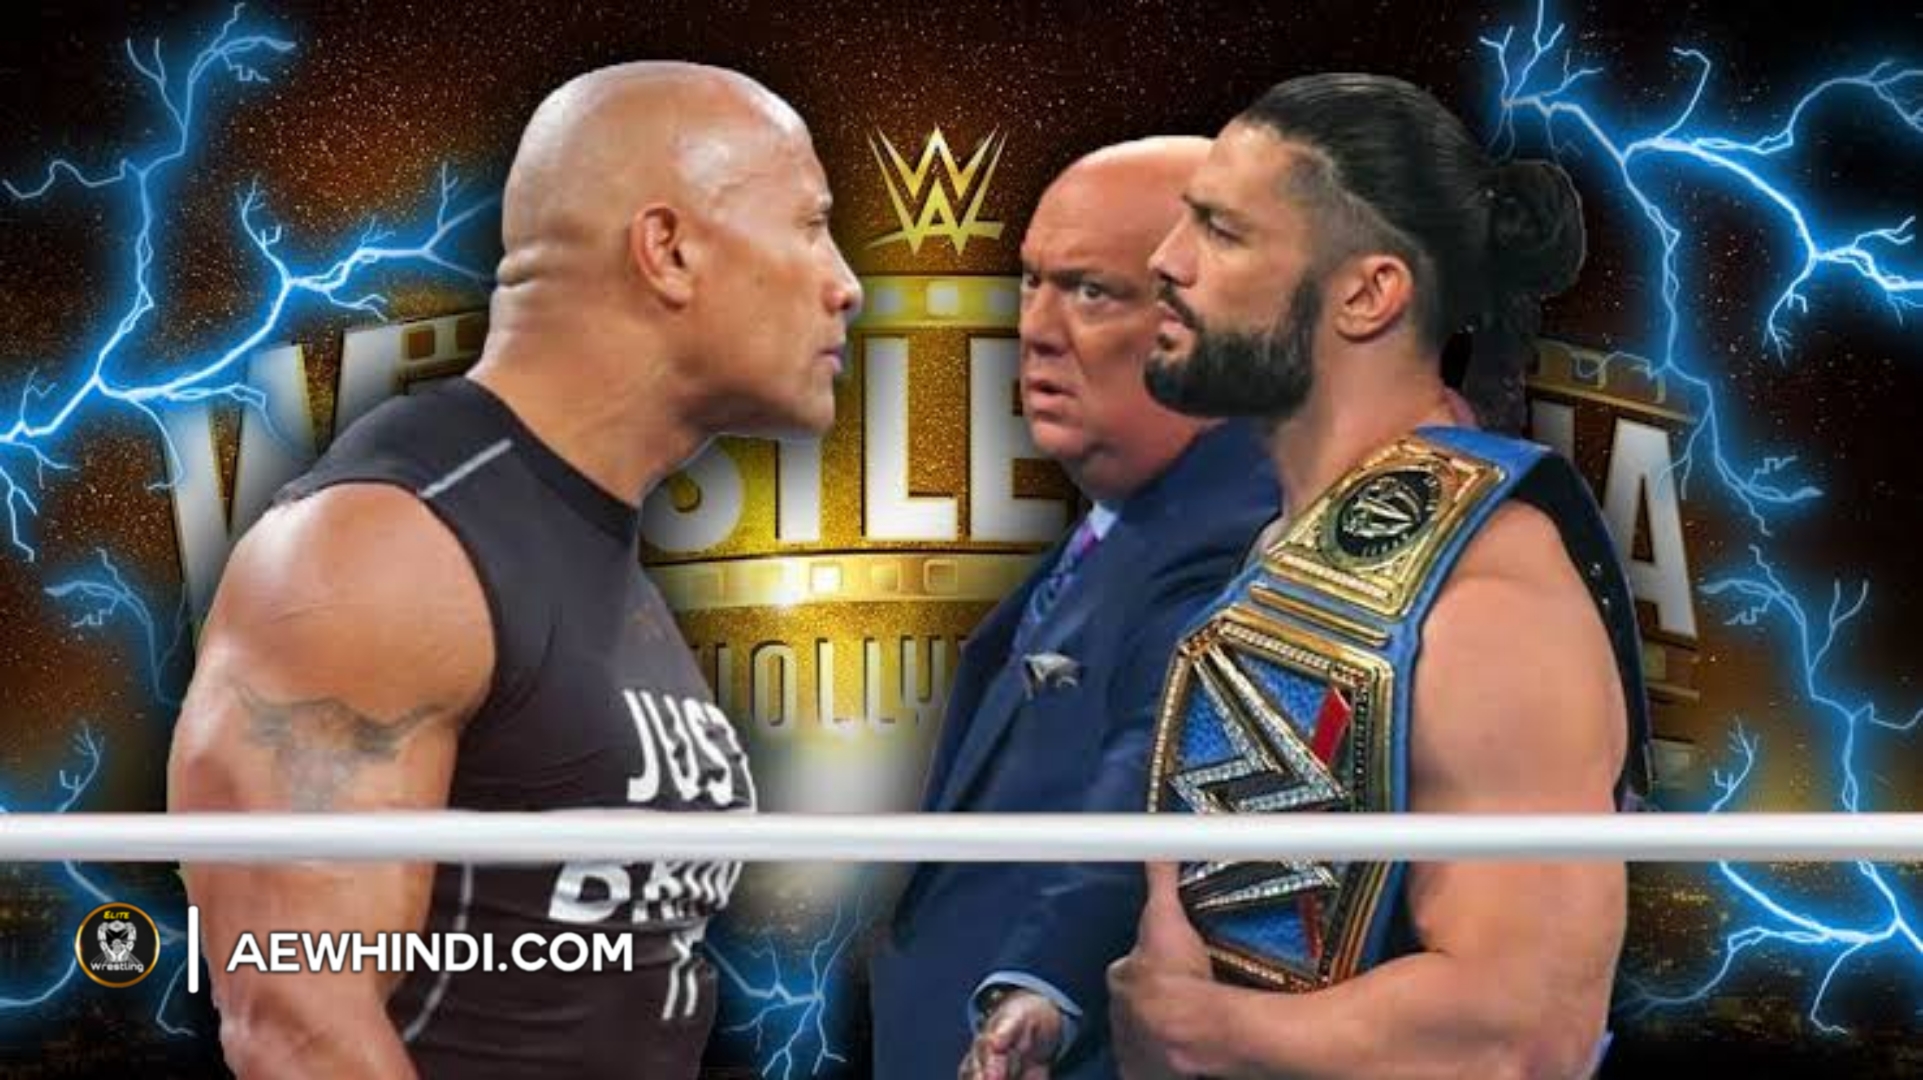 The Rock: Roman Reigns Vs The Rock was planned & might happen soon